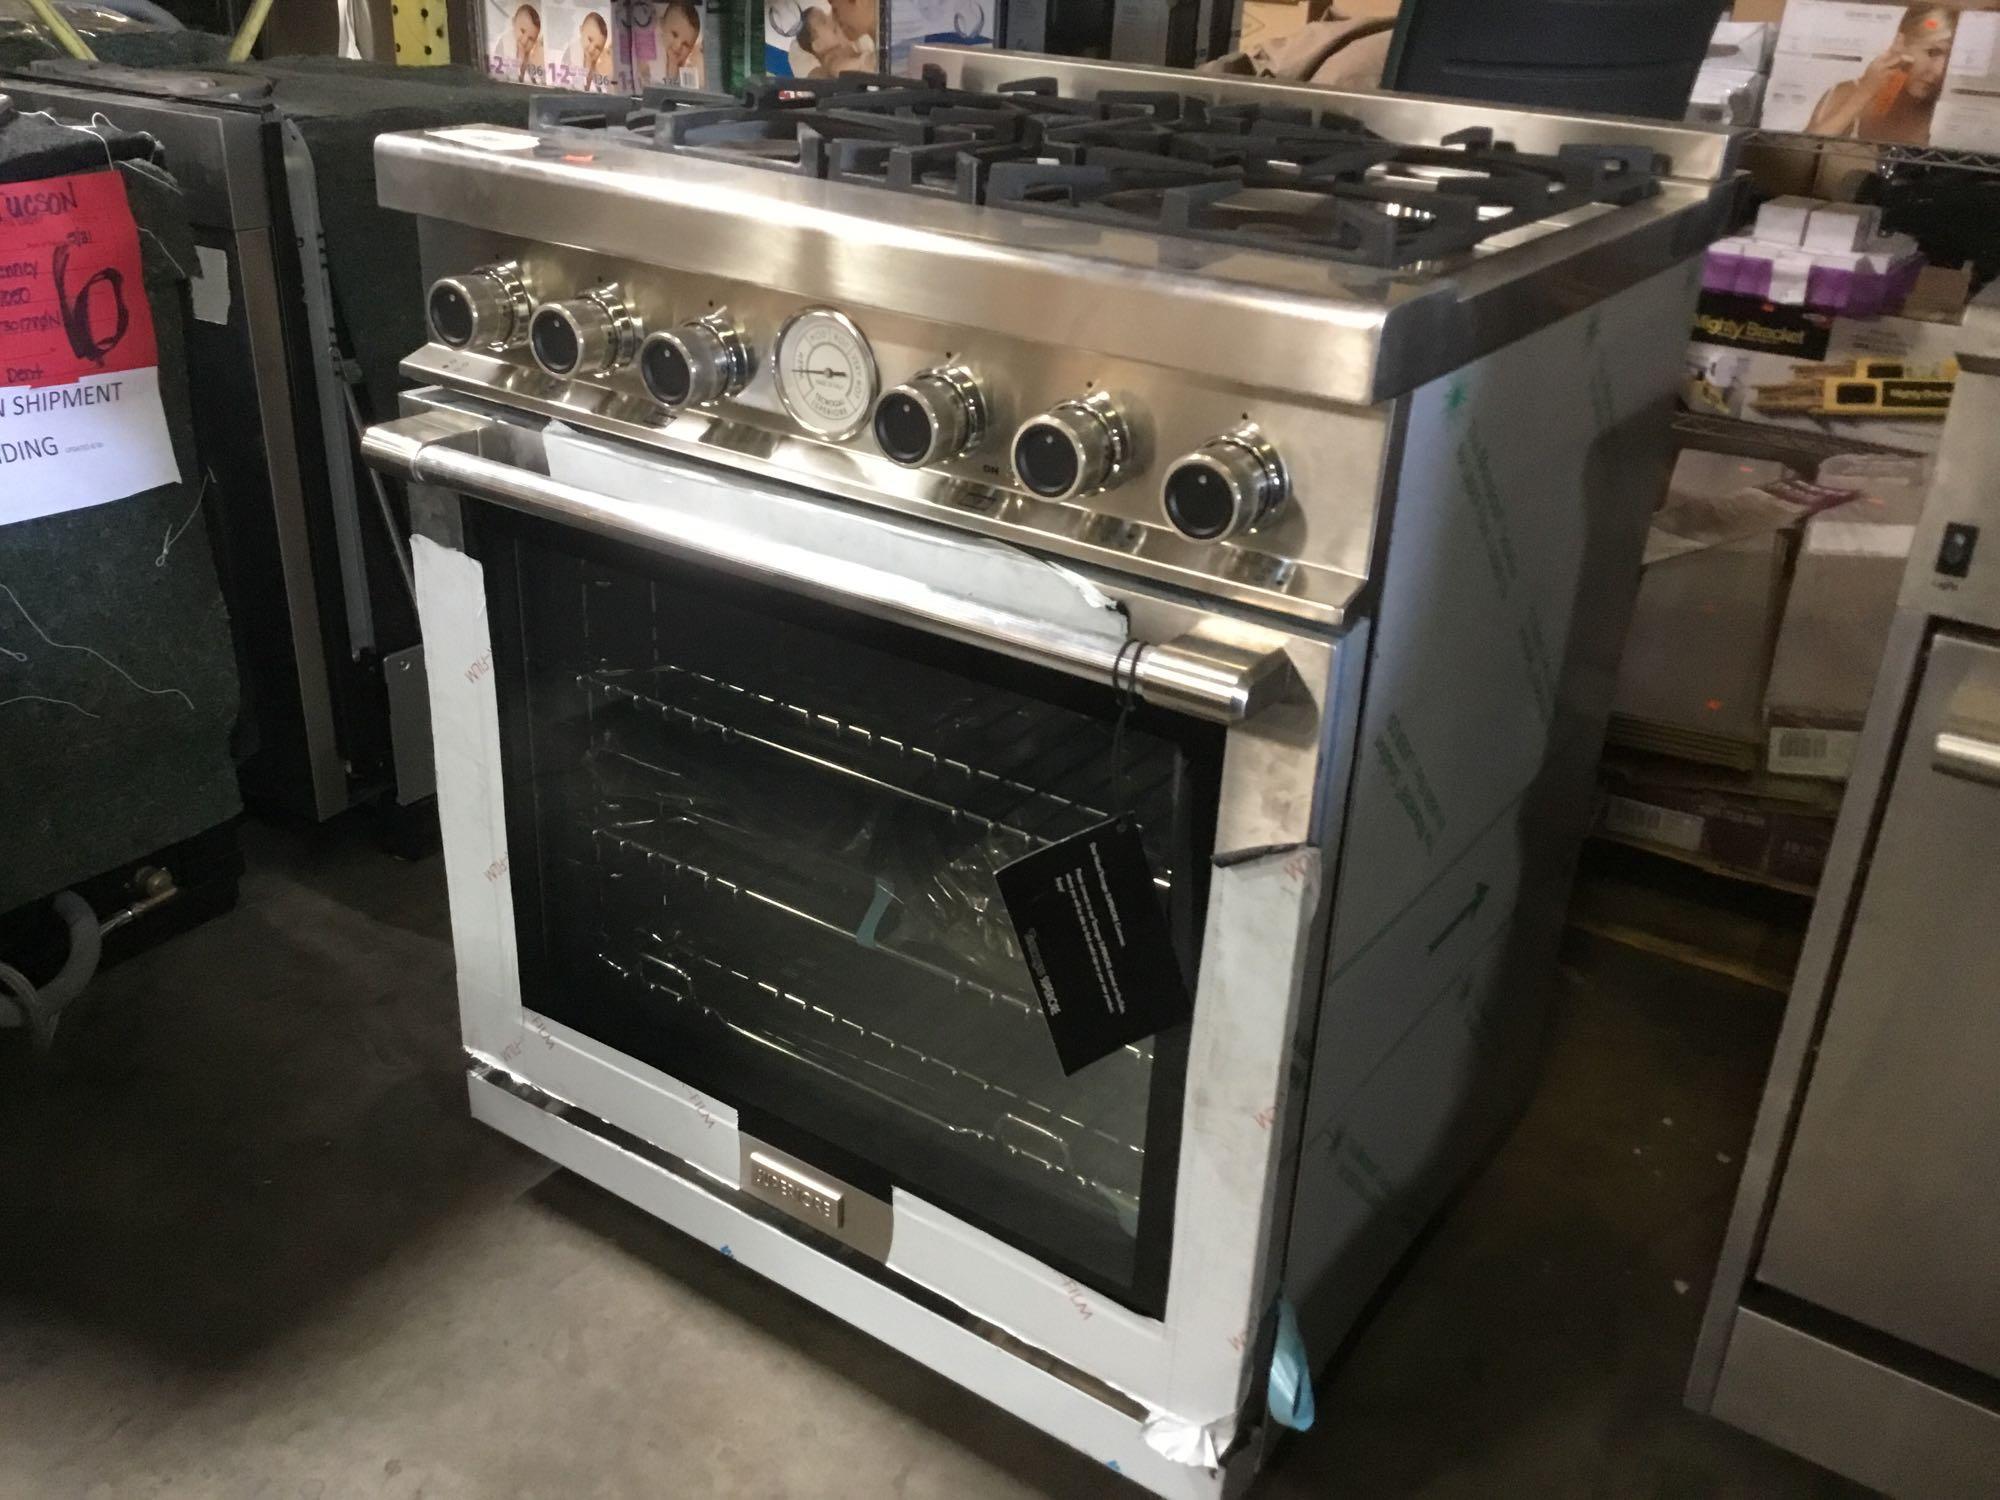 Stainless Steel Technogas Superiore 30 in. Freestanding Natural Gas Range